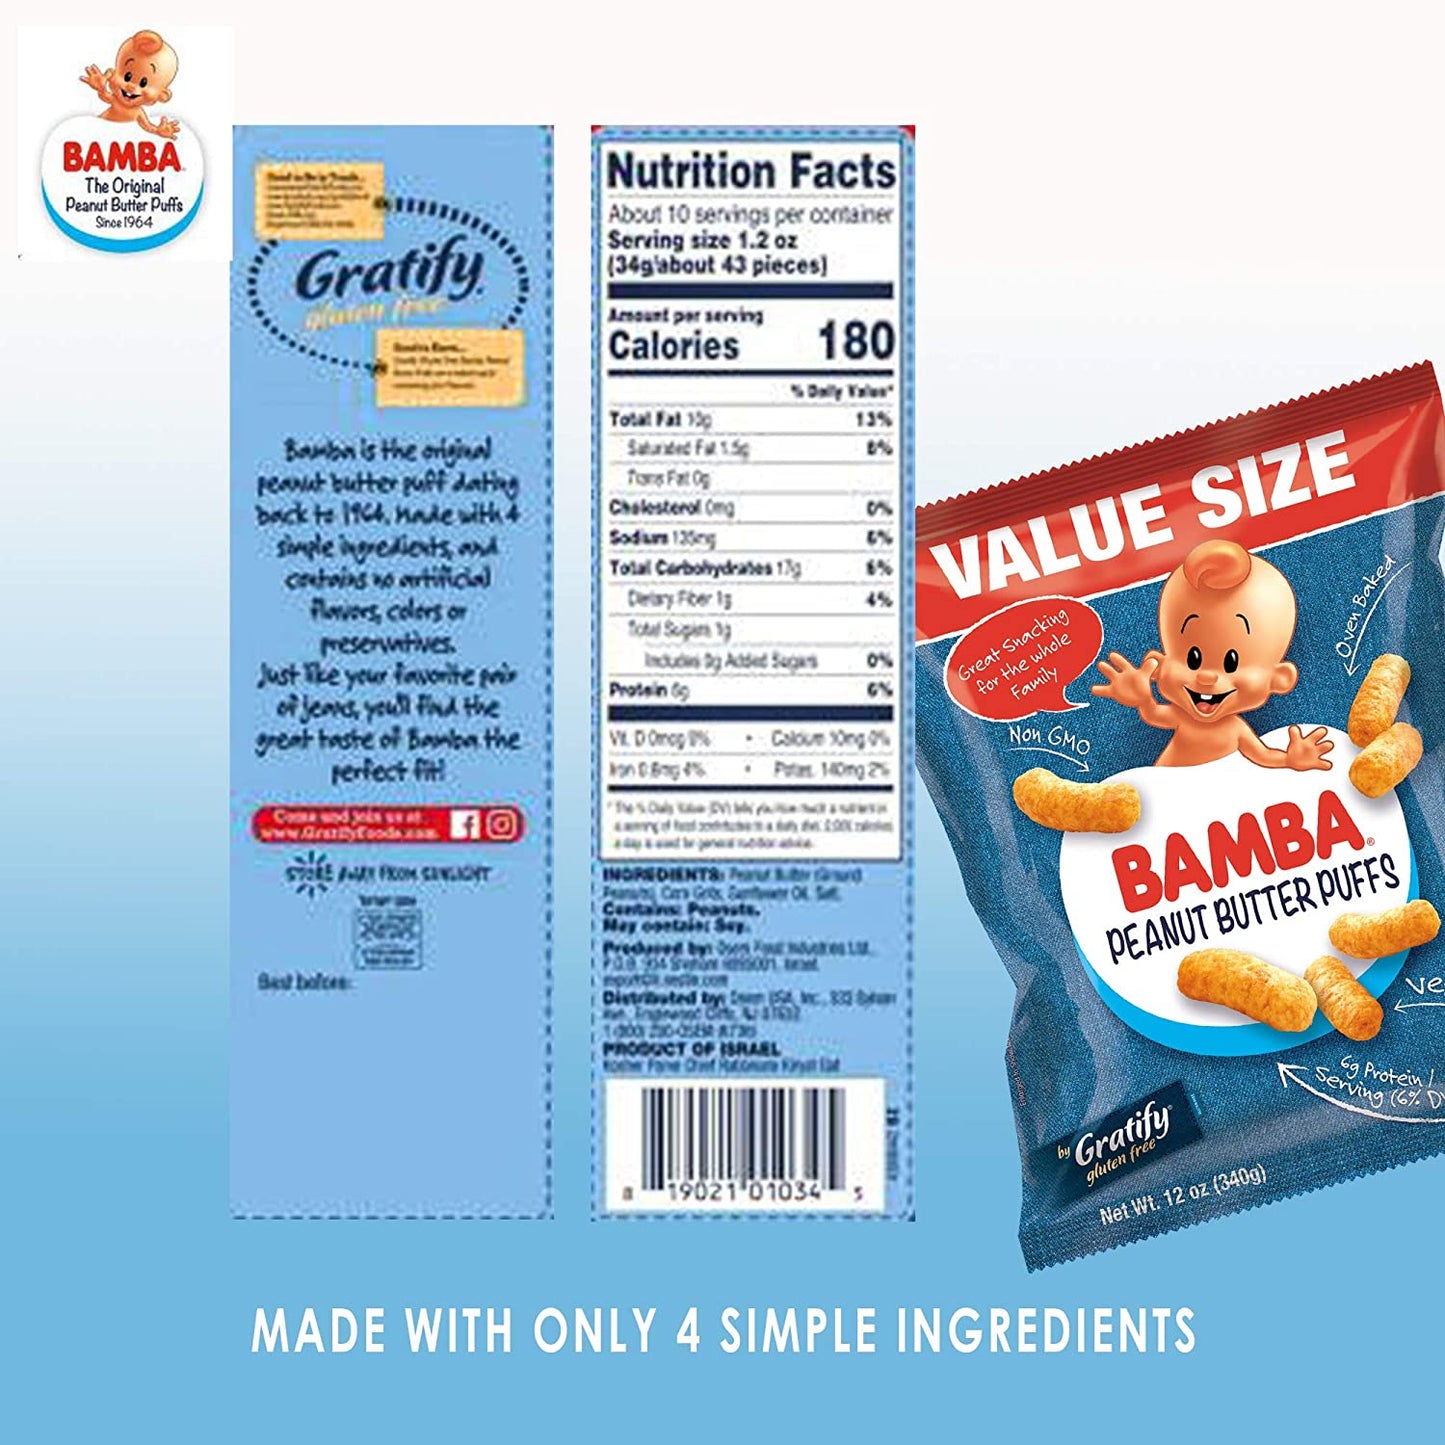 Gratify Bamba Peanut Butter Snacks for Families - All Natural Peanut Butter Puffs Value Size ( 2 pack - 12oz Bags) - Peanut Butter Puffs made with 4 Simple Ingredients. Family Size Bags